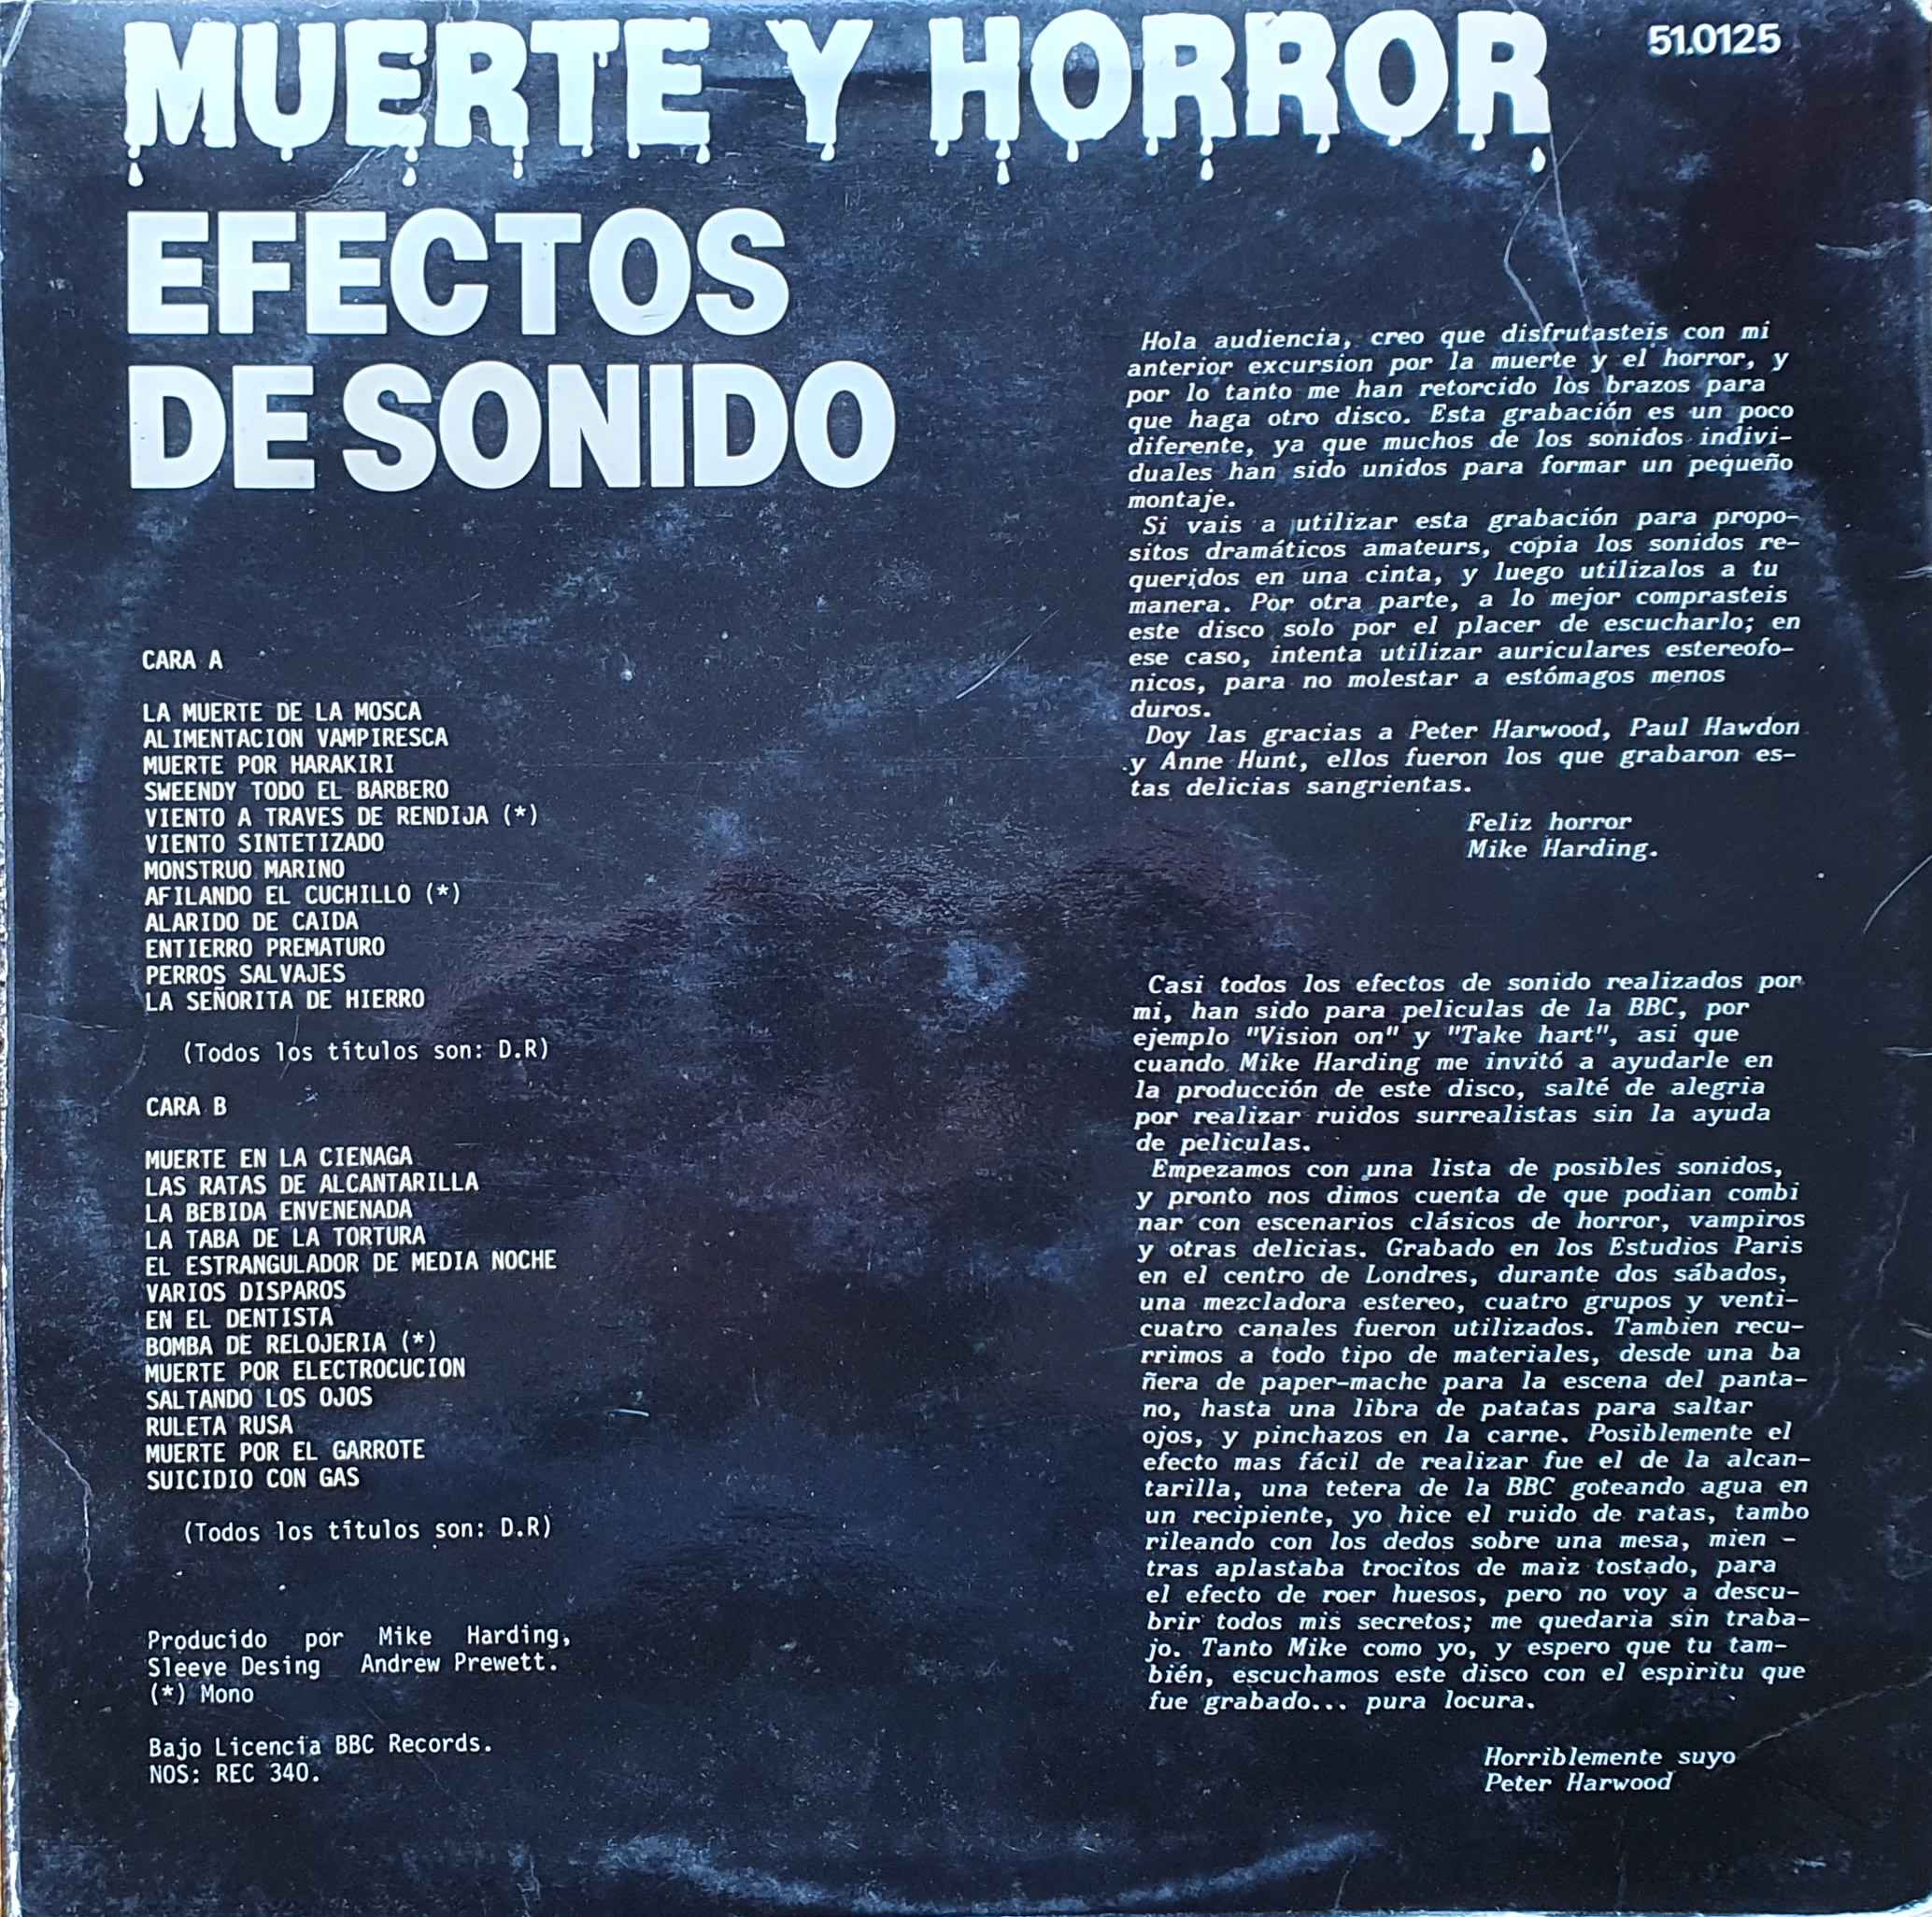 Picture of 51.0125 Efectos de sonido Vol. 21 - Muerte Y Horror by artist Various from the BBC records and Tapes library